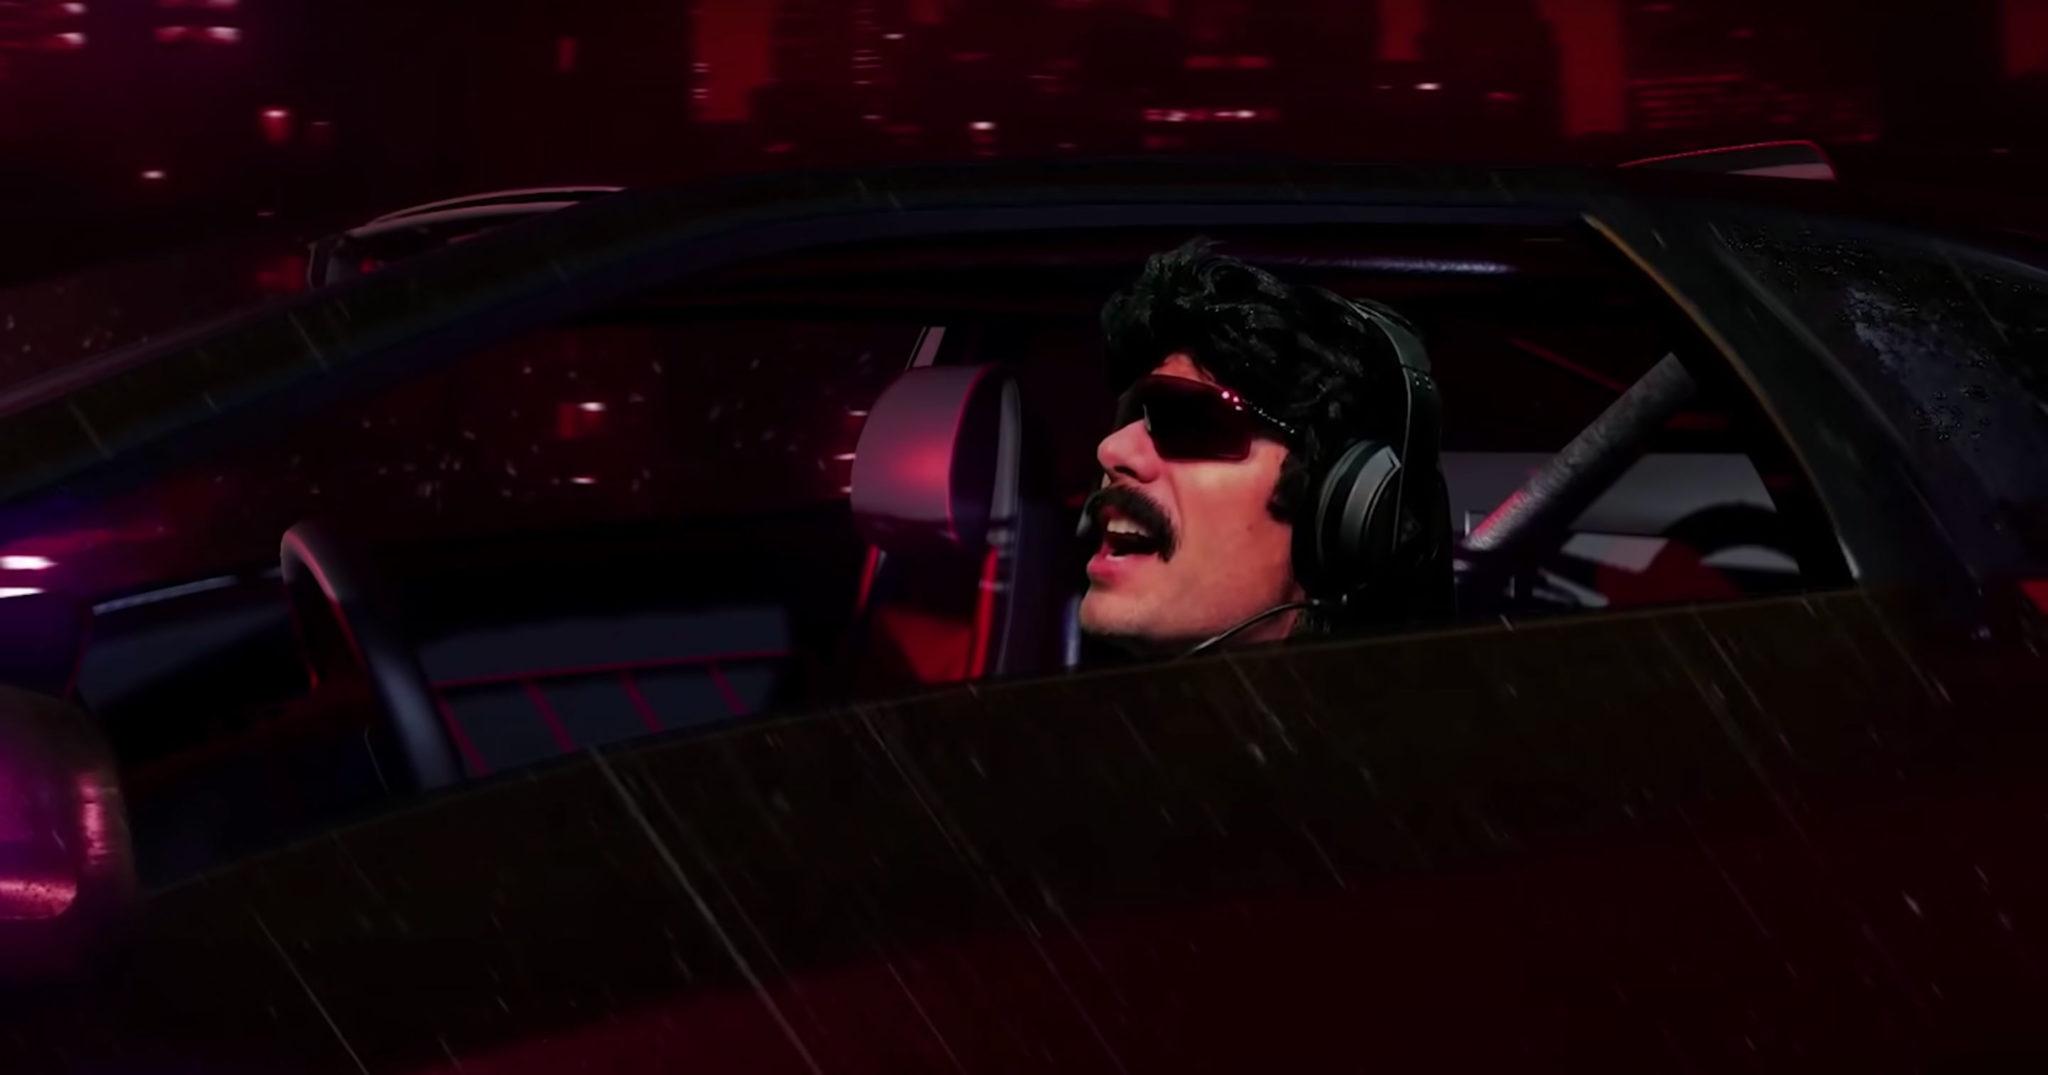 Dr Disrespect on YouTube.